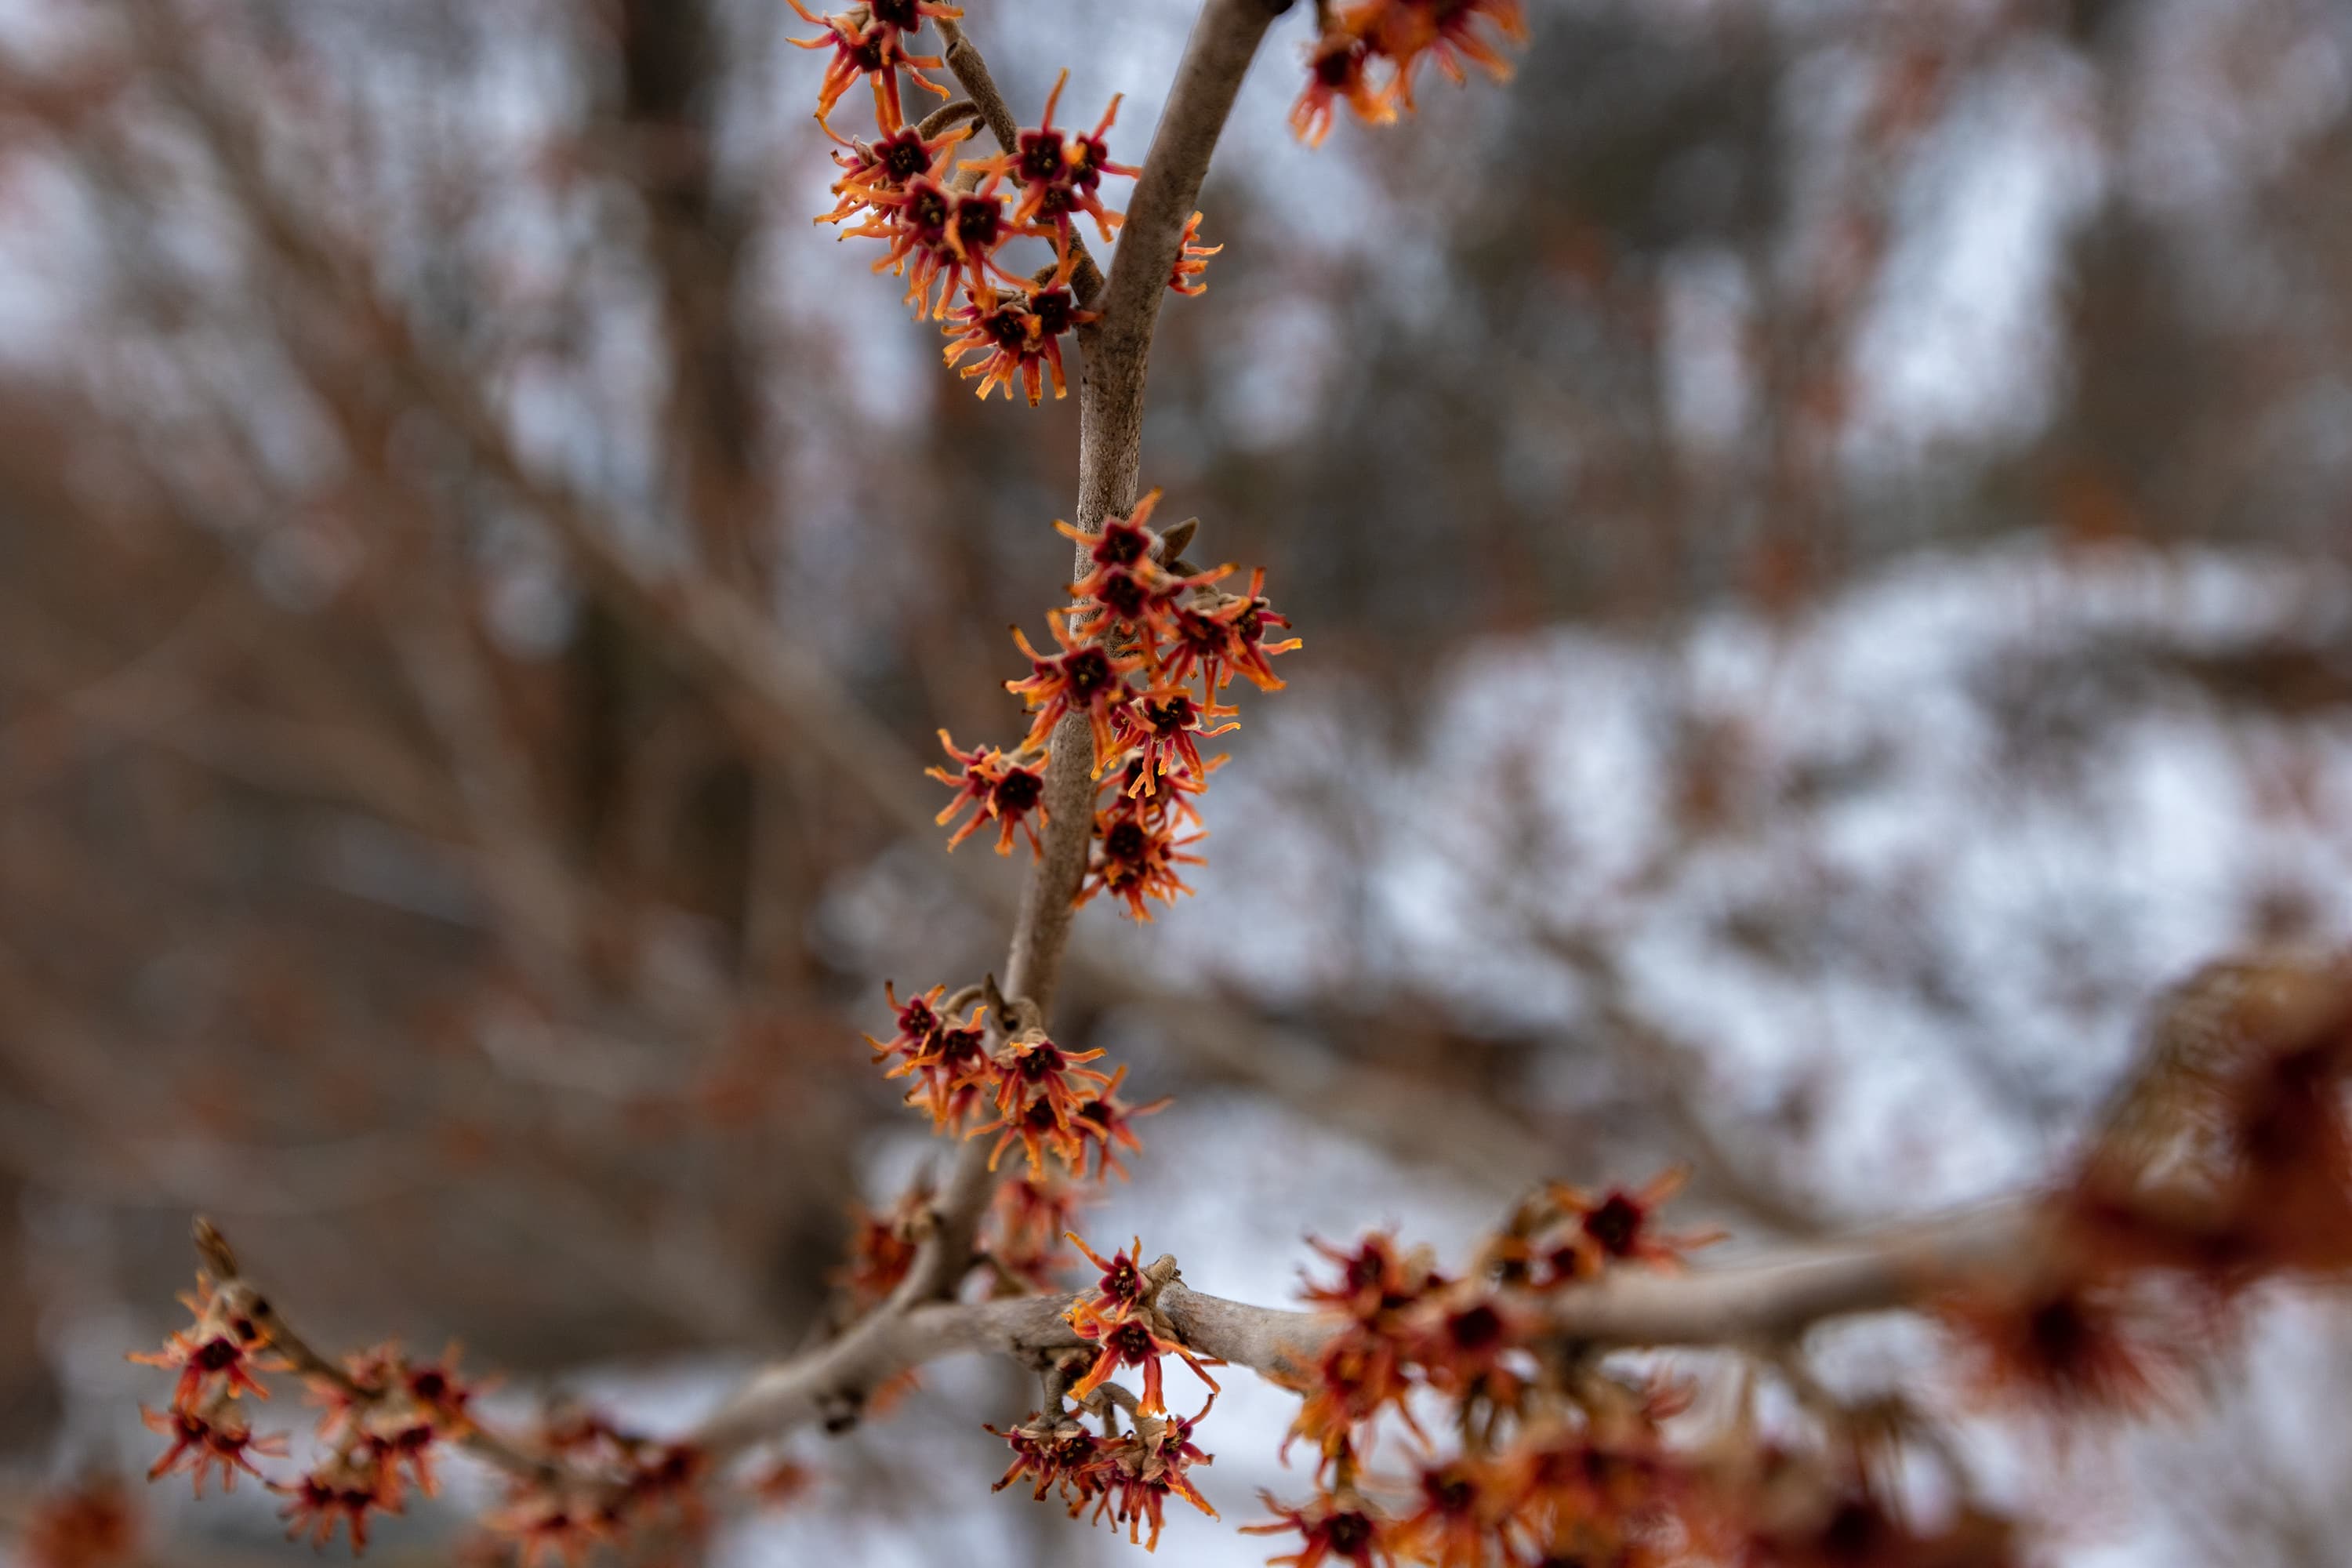 An Ozark witch hazel bush, a spring blooming variety planted at Drumlin Farm, is blooming earlier than usual because of the lack of winter weather. (Jesse Costa/WBUR)